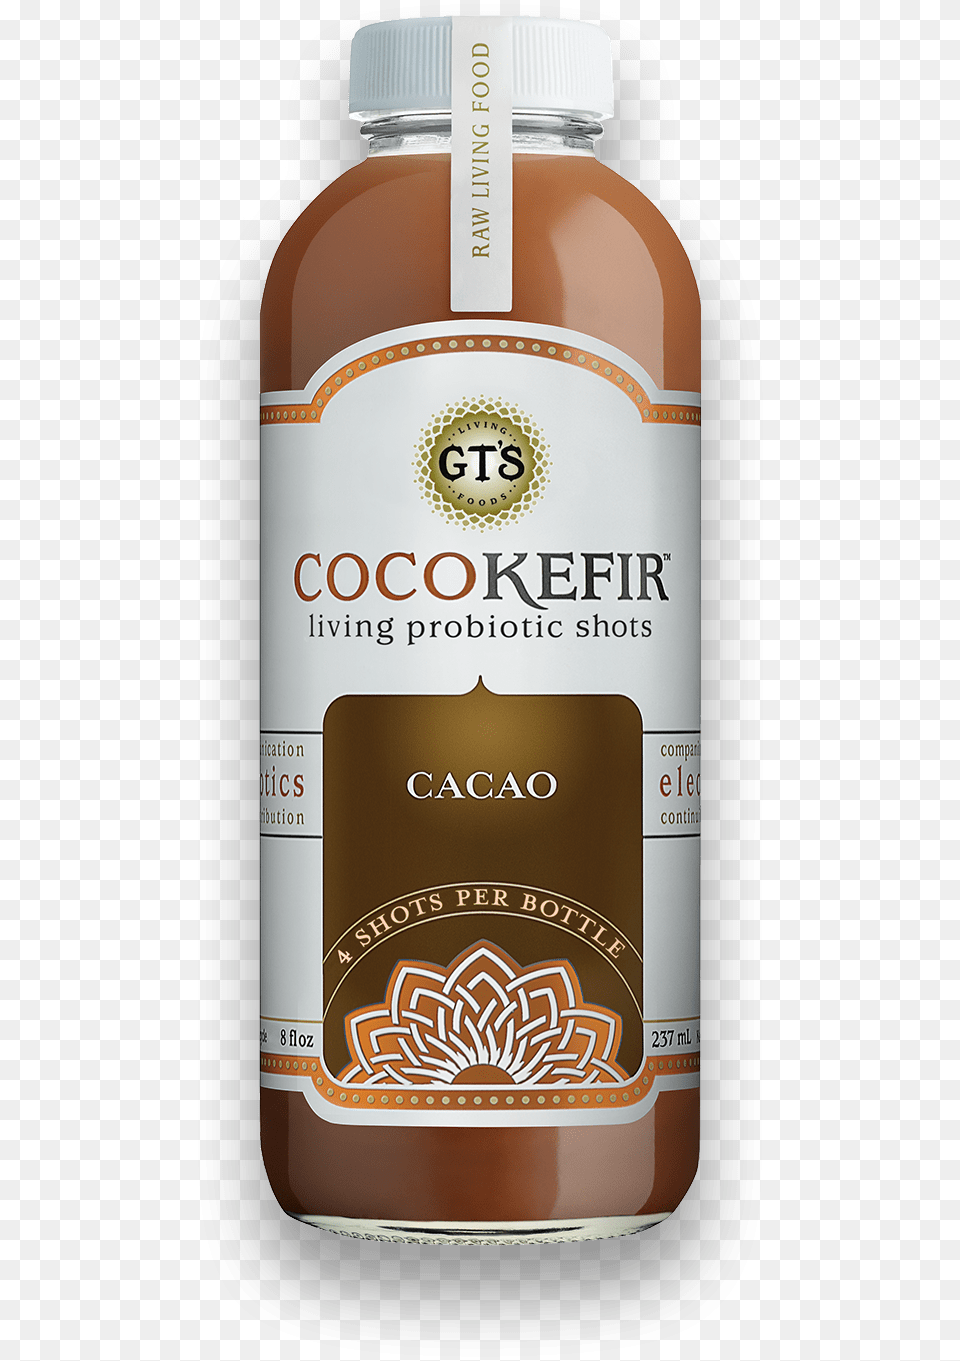 Gts Organic Cocokefir, Cup, Beverage Png Image